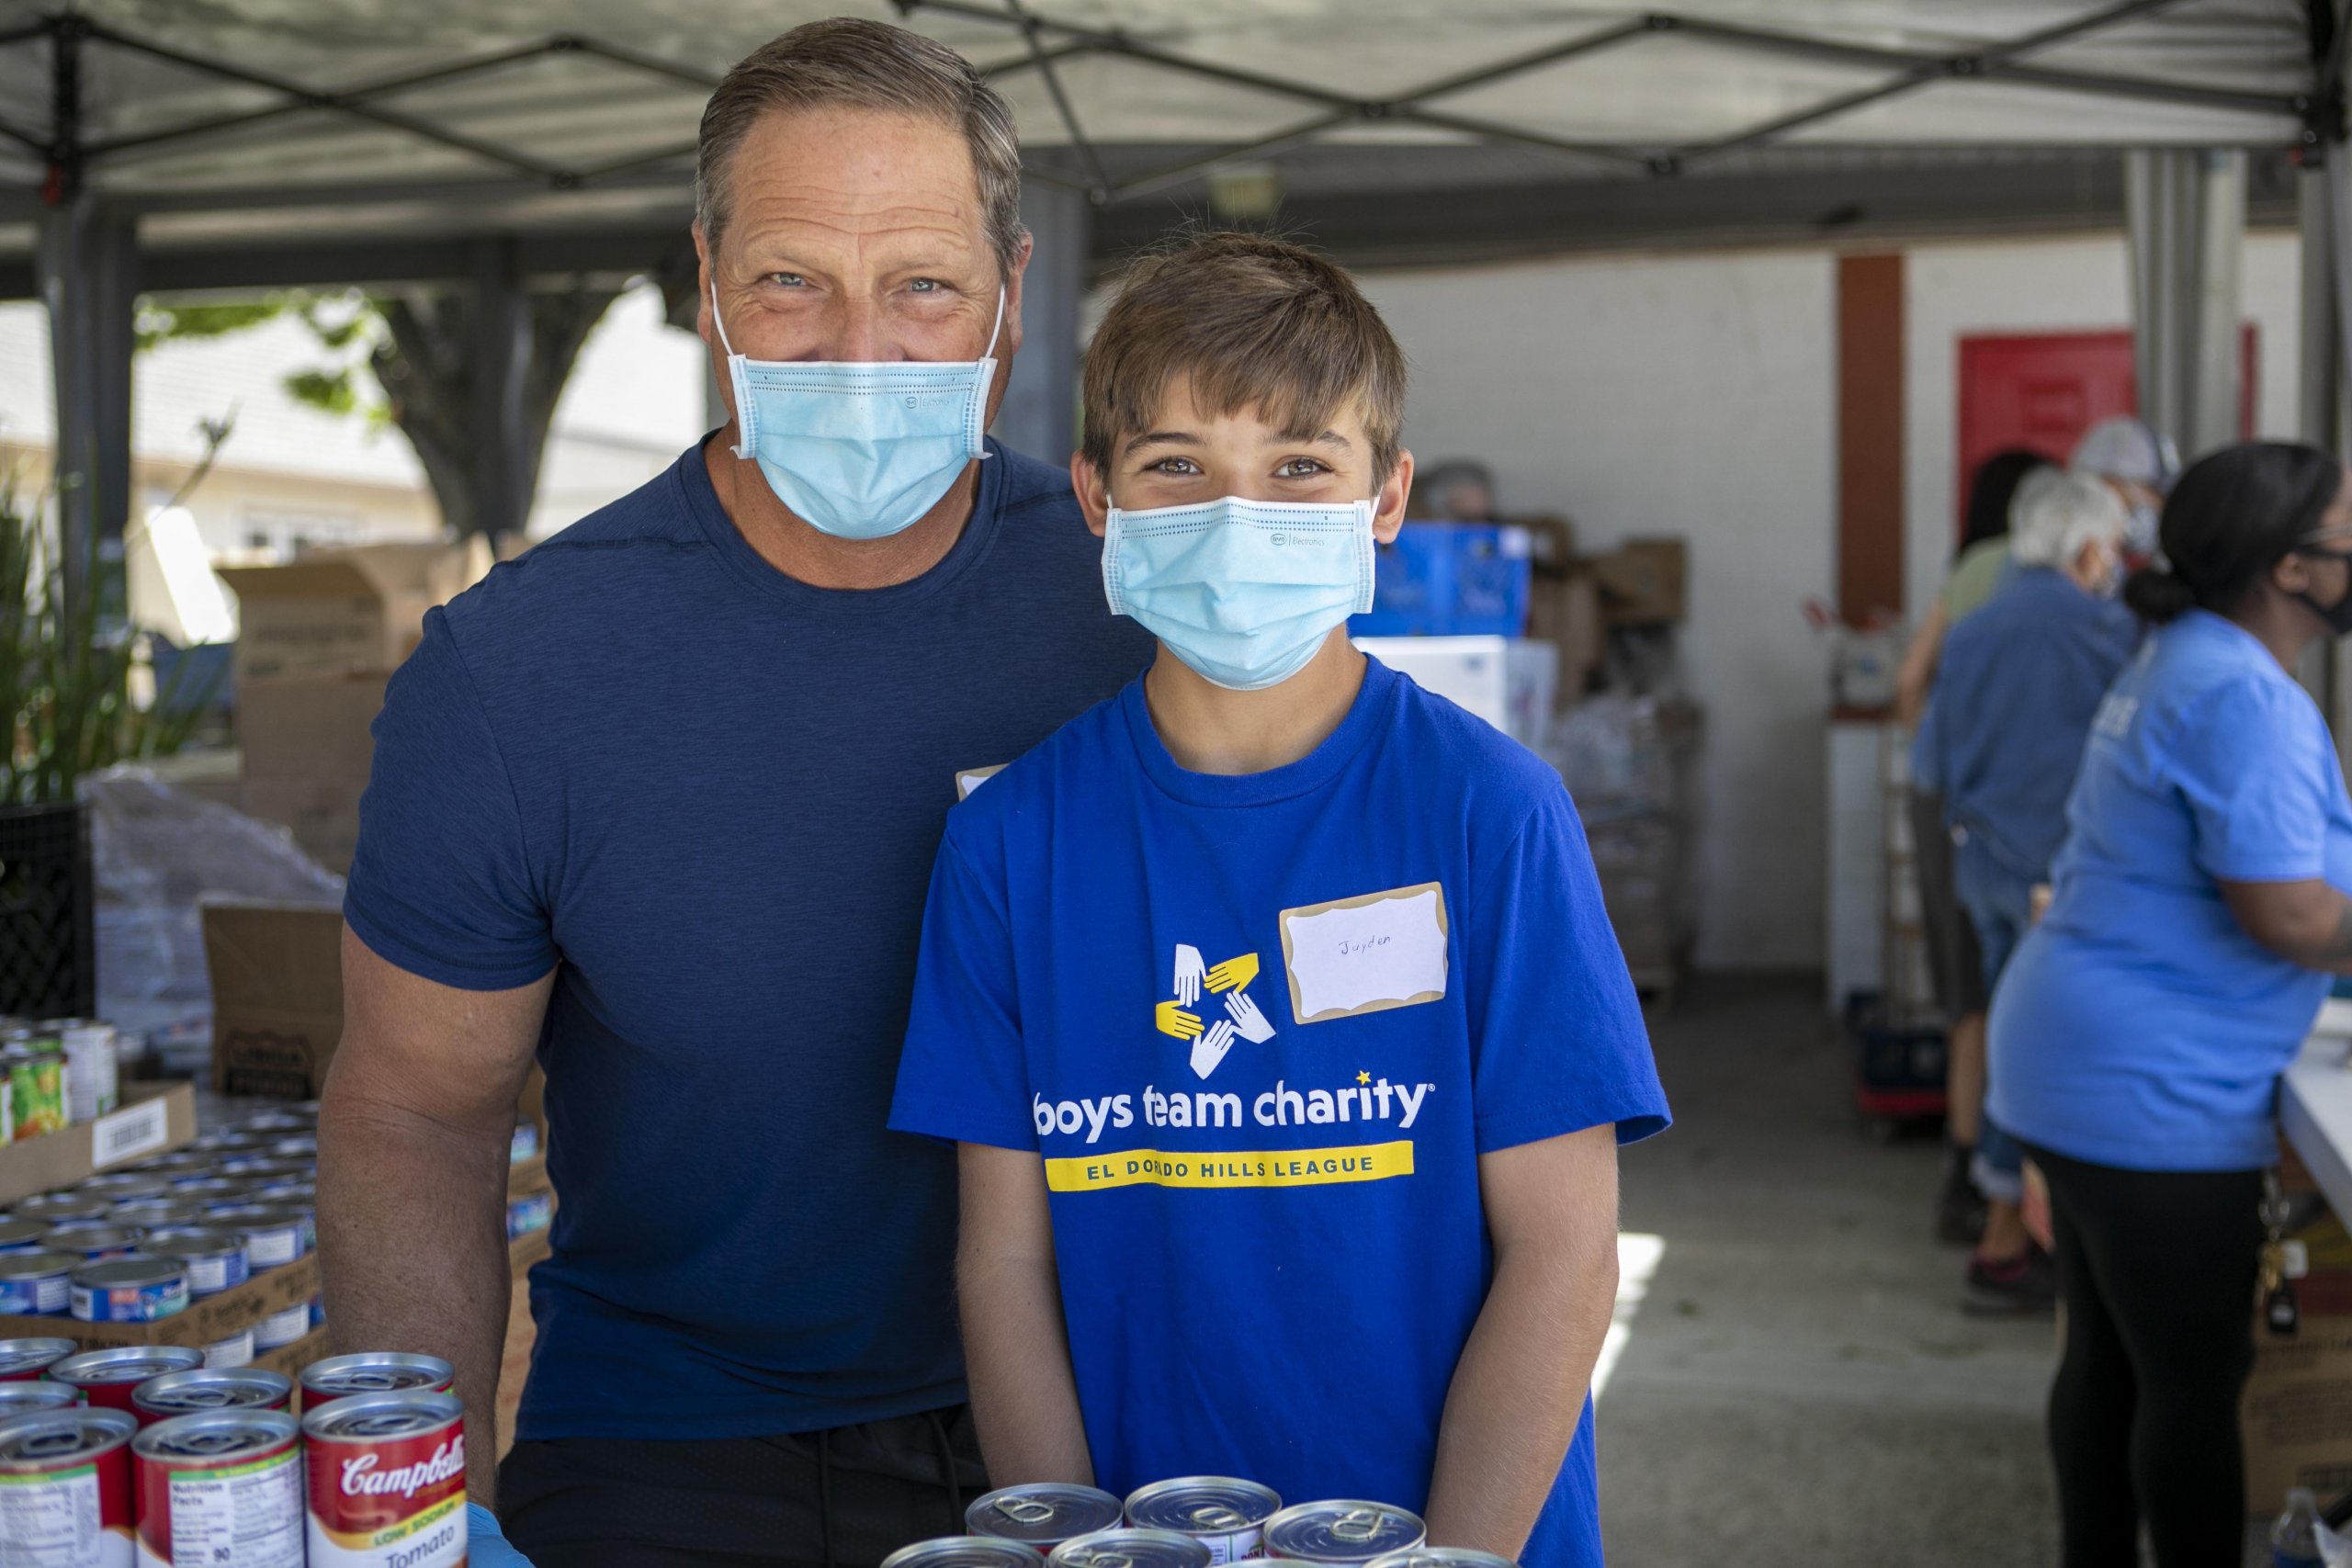 Young boy and father volunteering in masks at St. Matthews